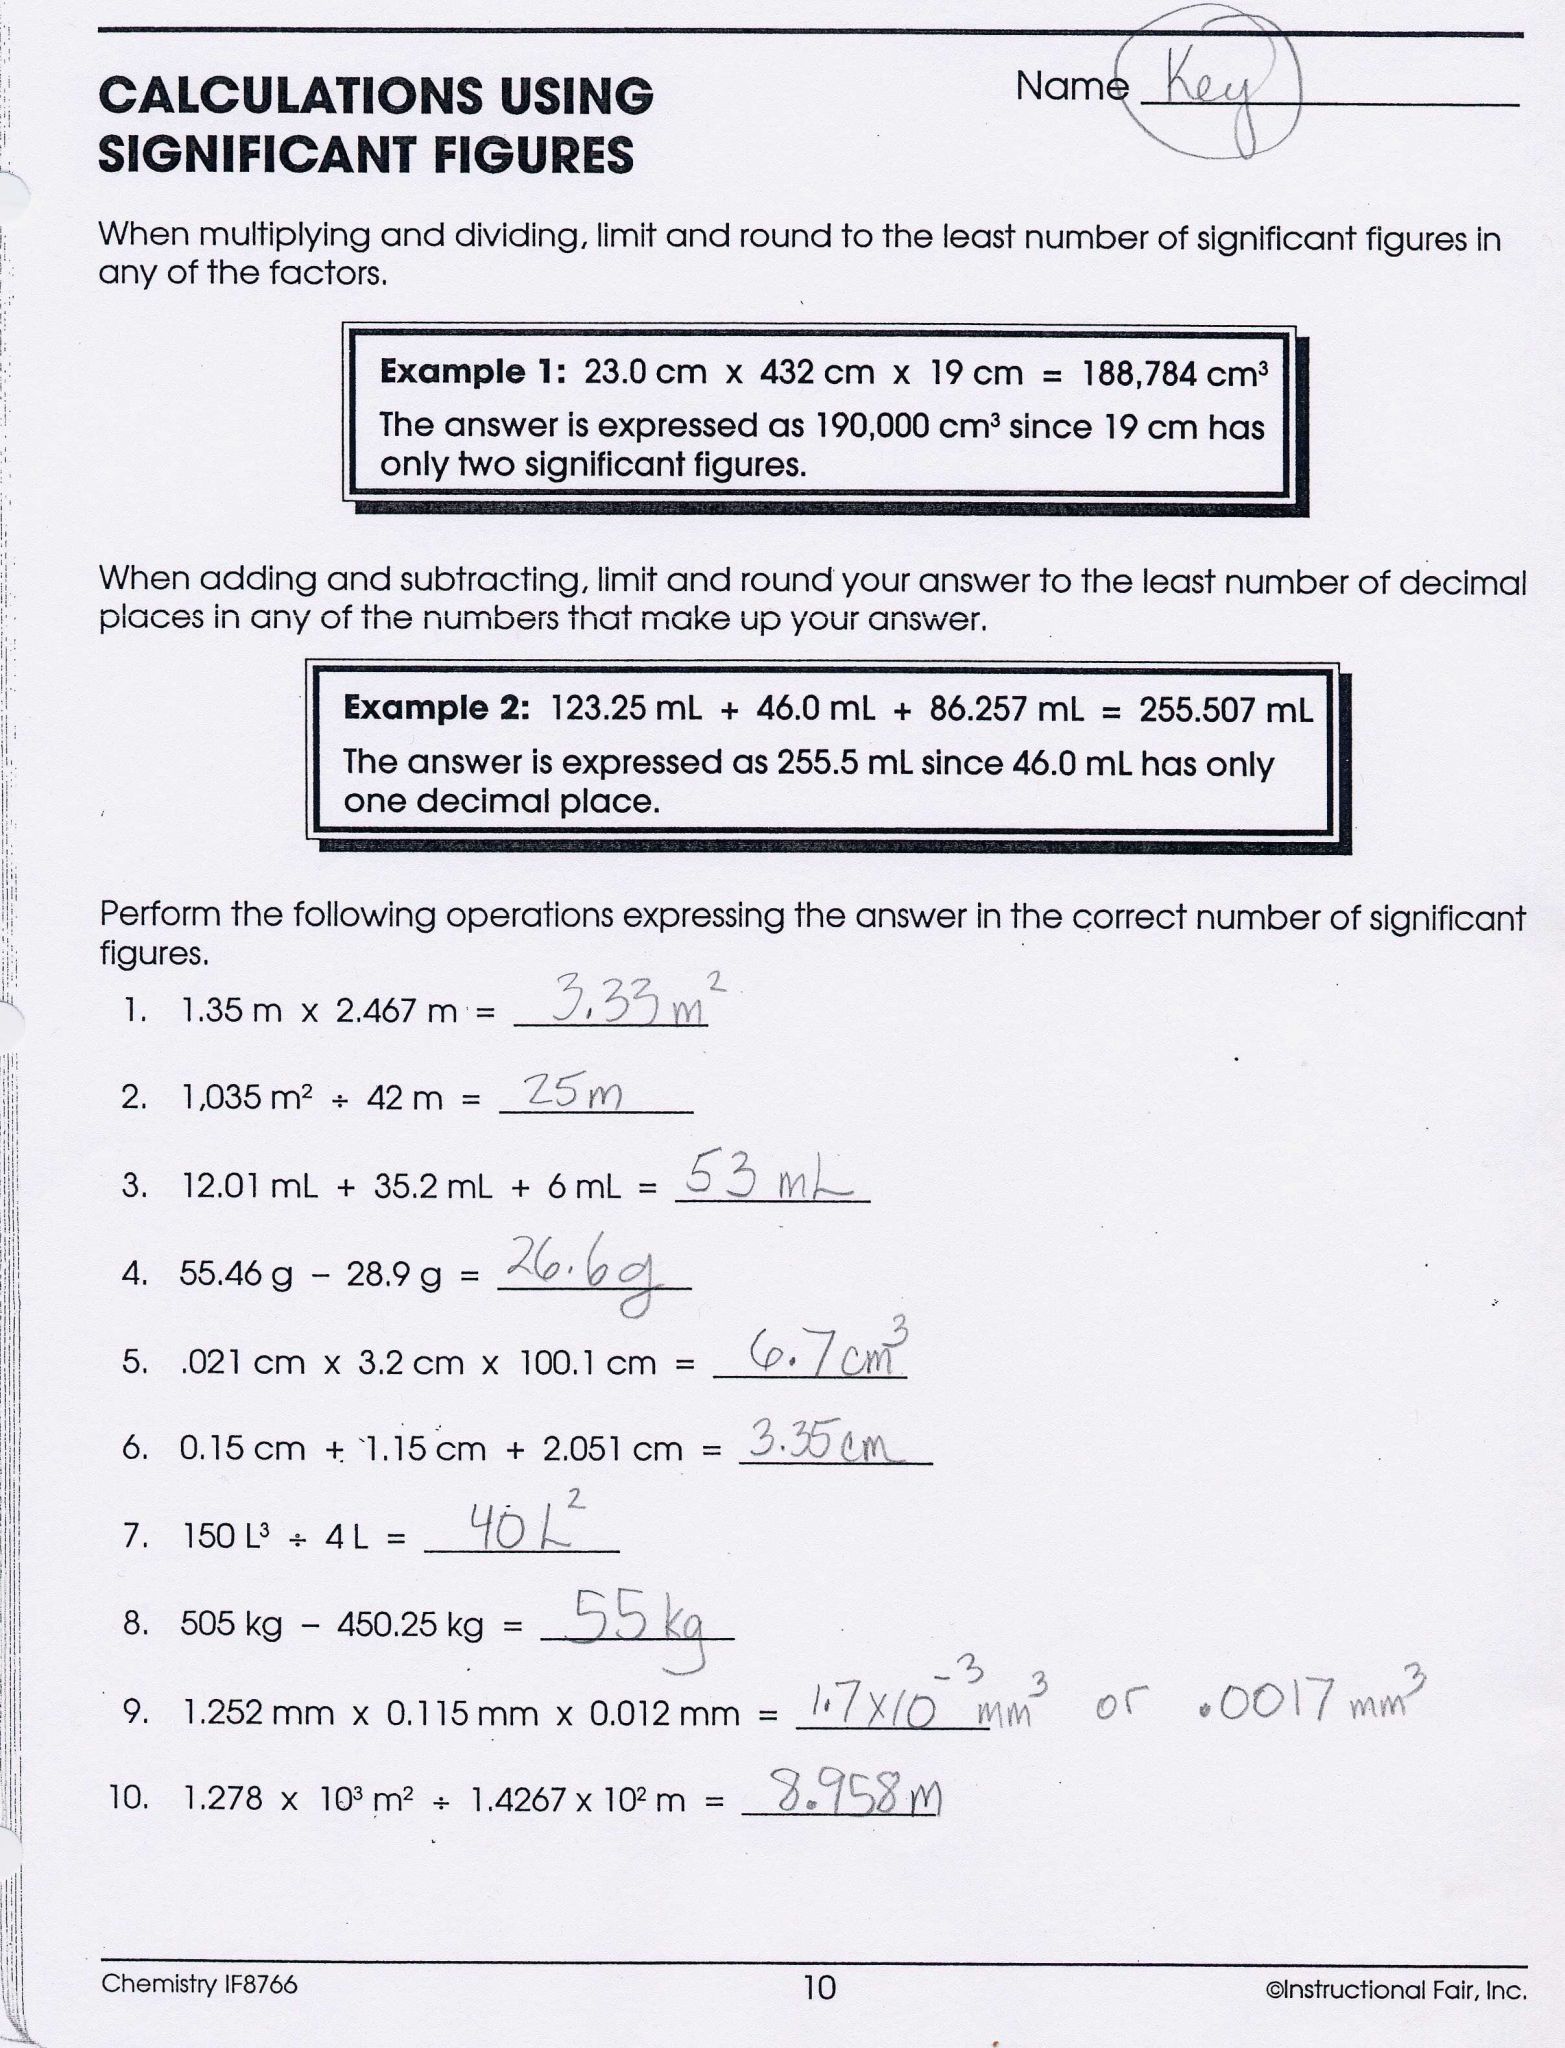 Atomic Structure Worksheet Answers Chemistry Also Collection Of Chemistry 6 3 Periodic Trends Worksheet Answers